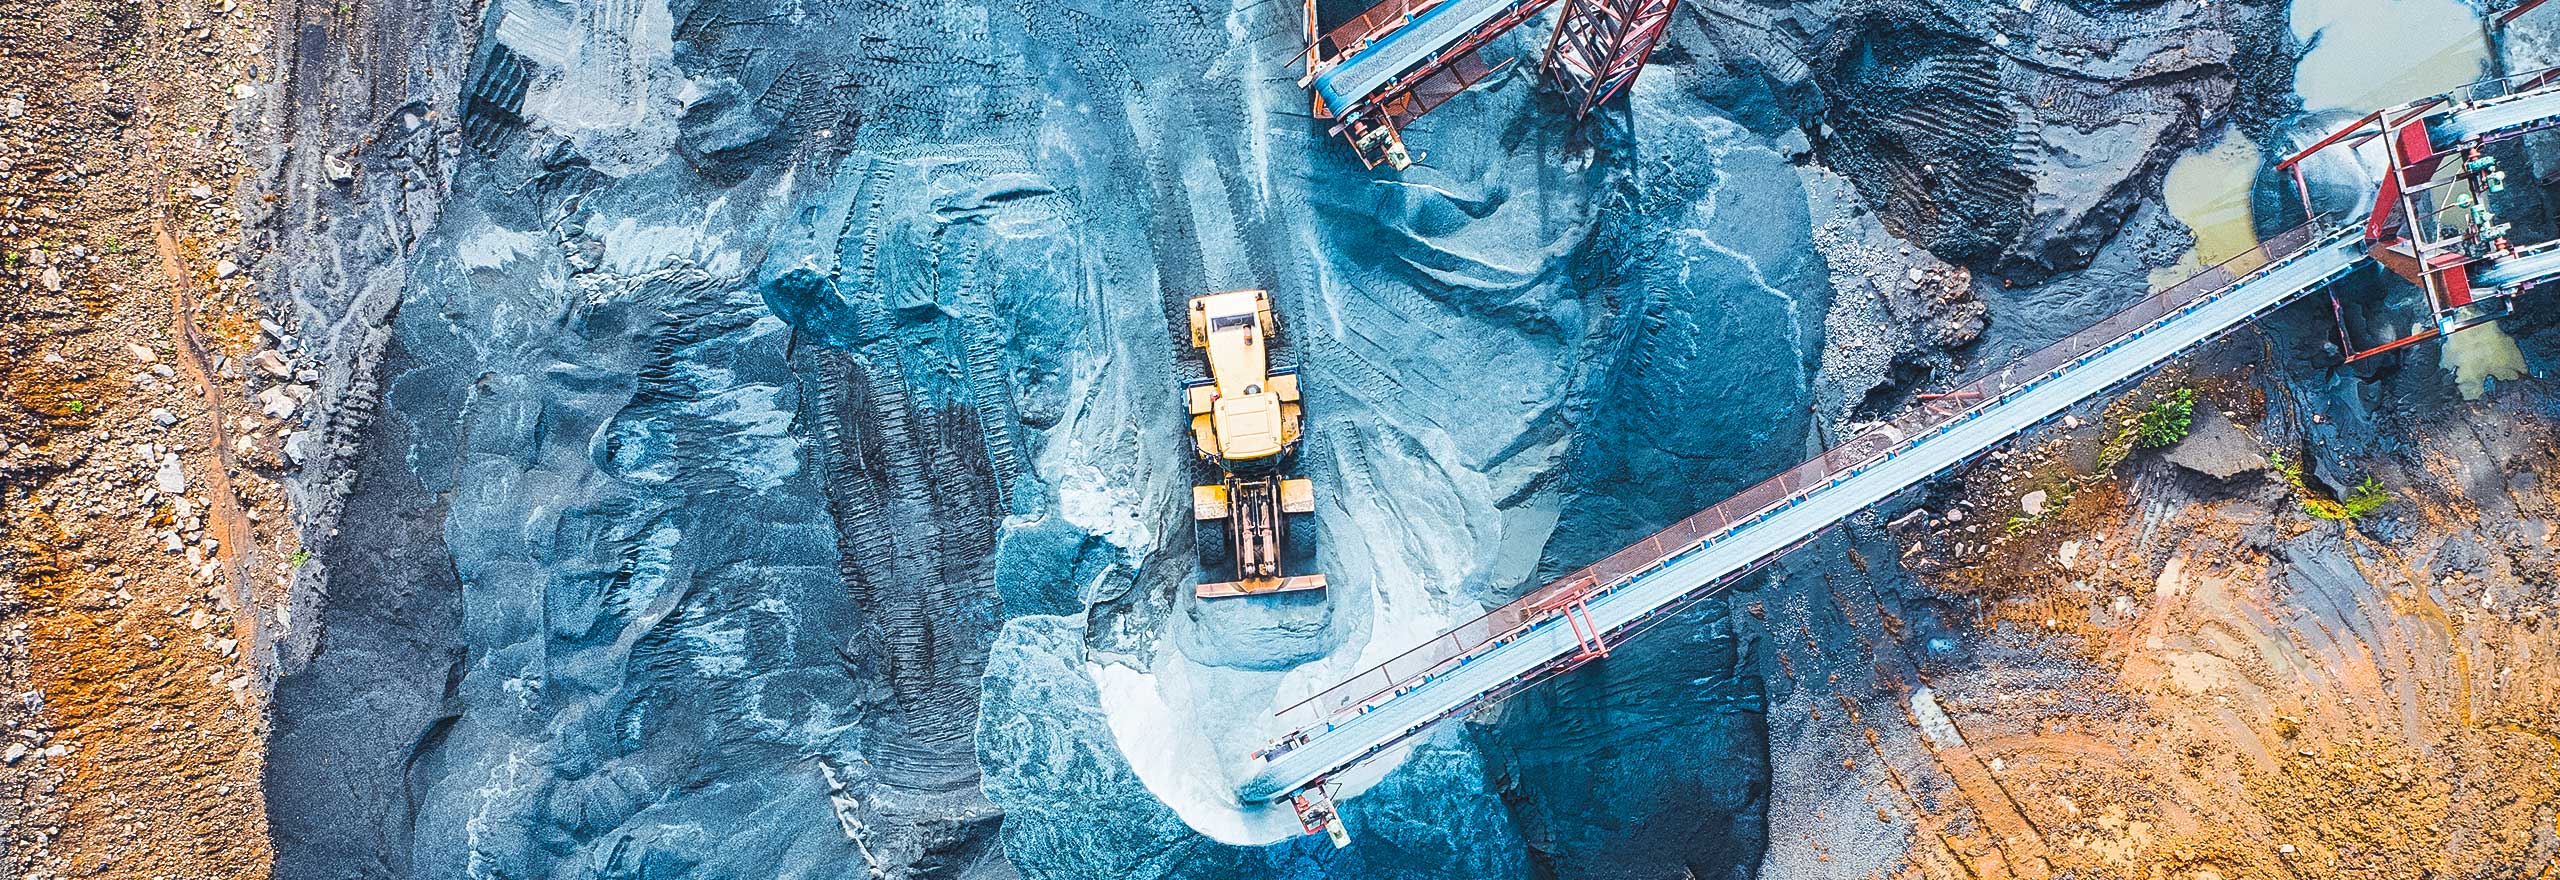 An aerial shot of a mining site